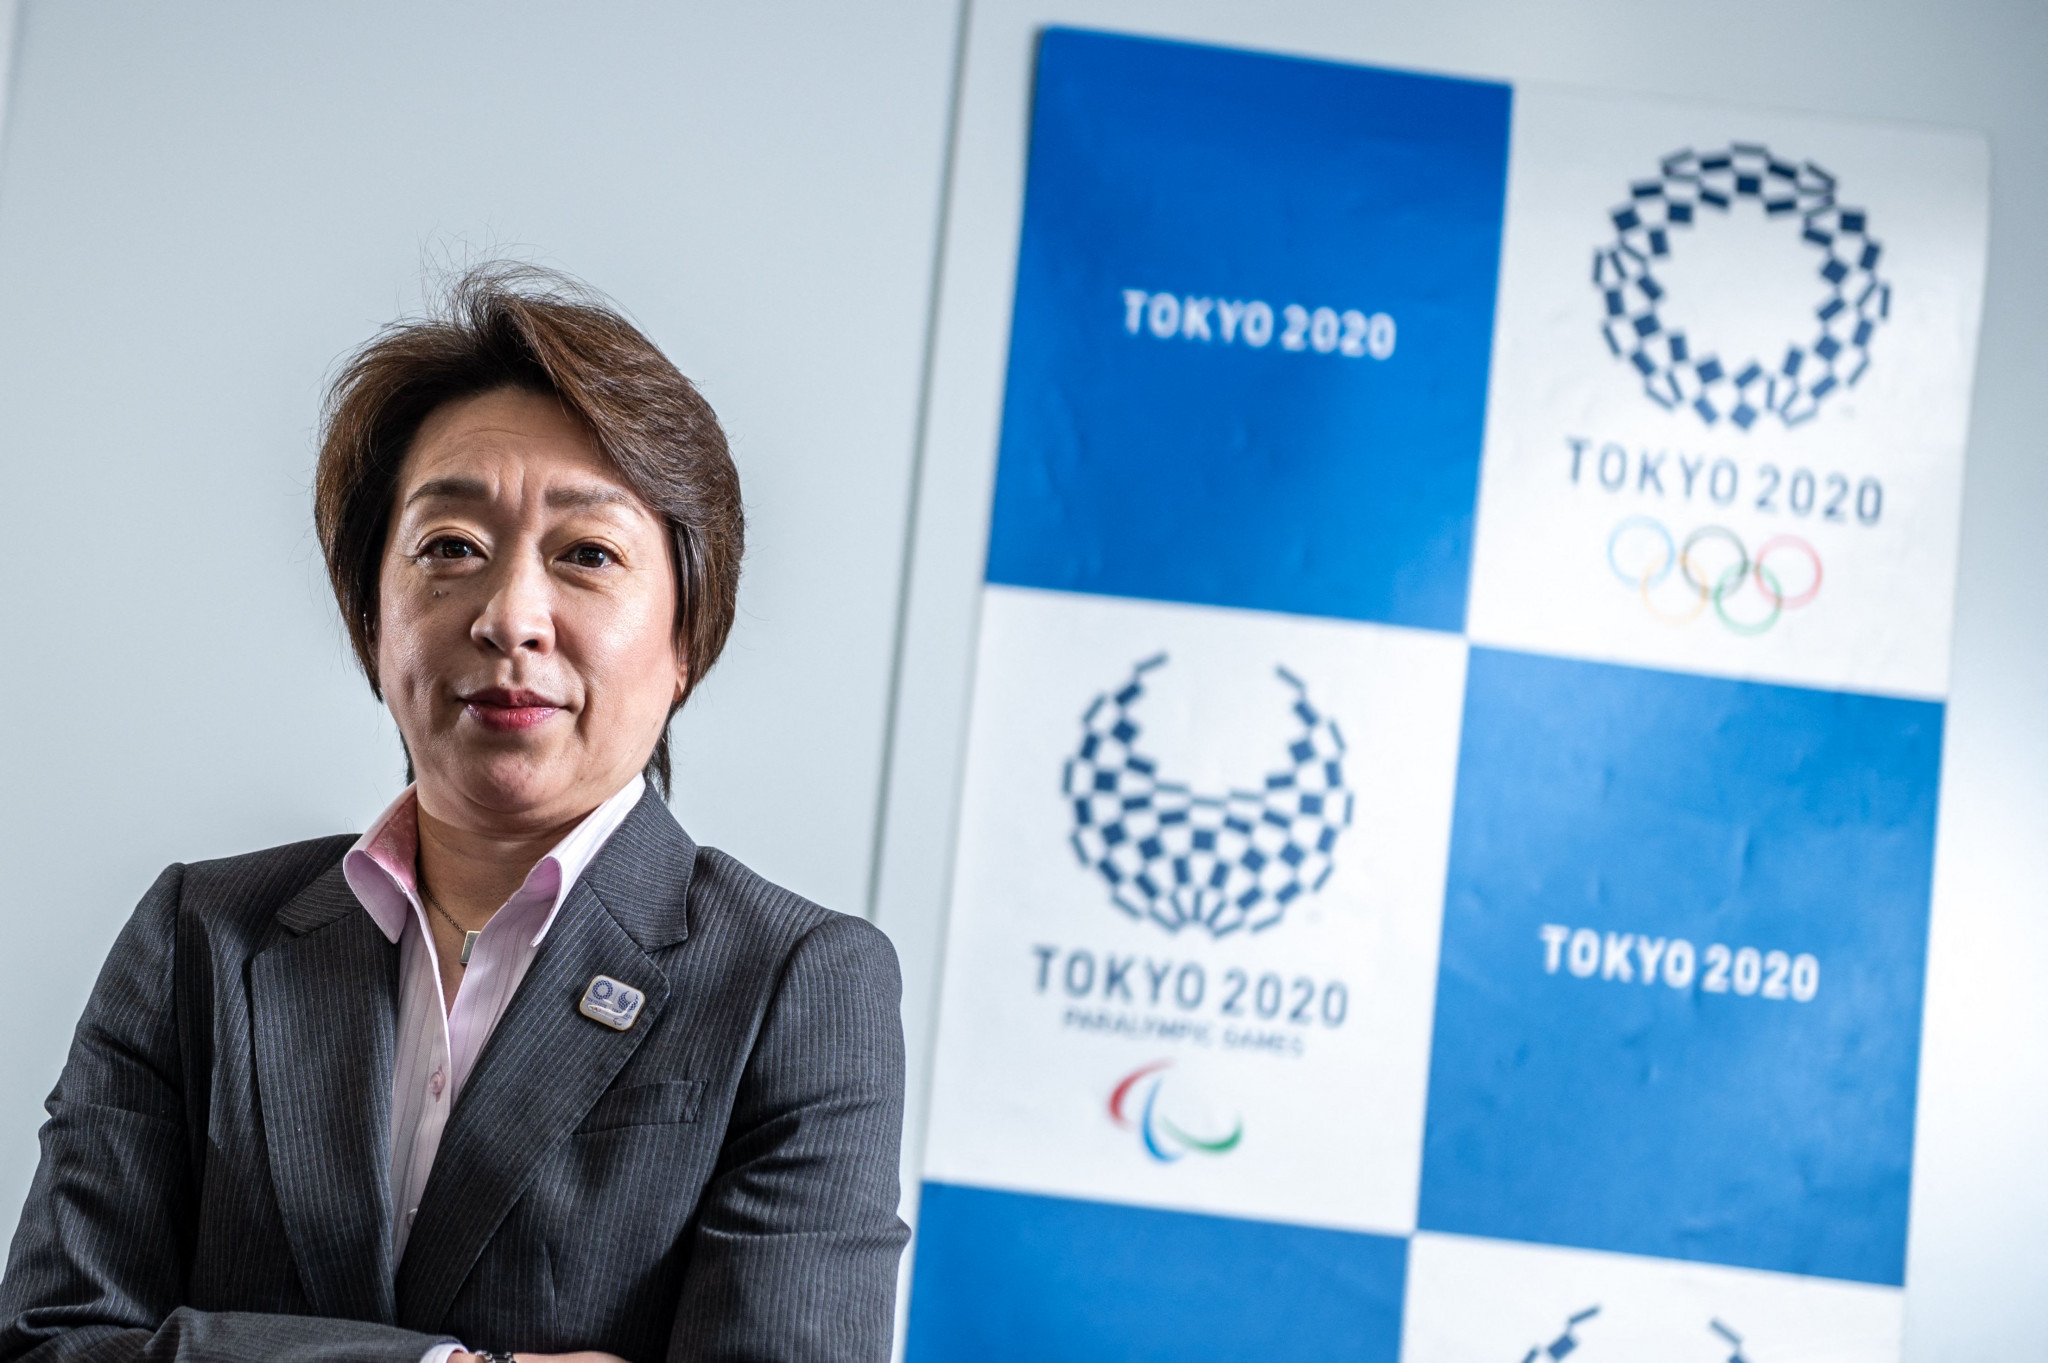 Hashimoto acknowledges Tokyo 2020 could take place behind closed doors